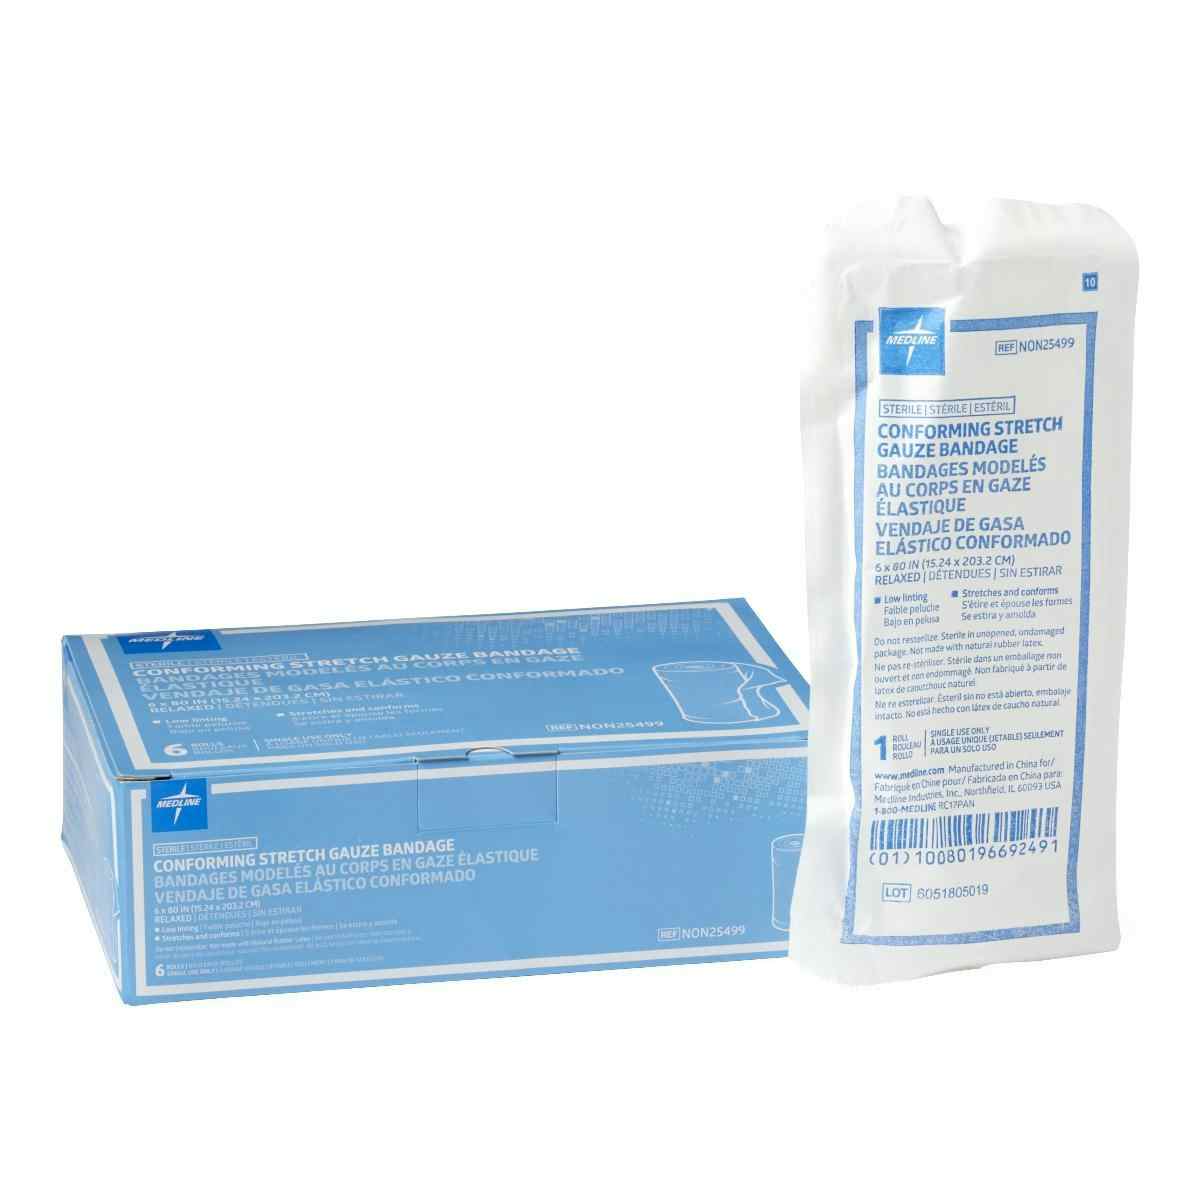 Medline Conforming Stretch Gauze Bandages, Heavy Weight, NON25499H, 6" X 80" - Box of 6